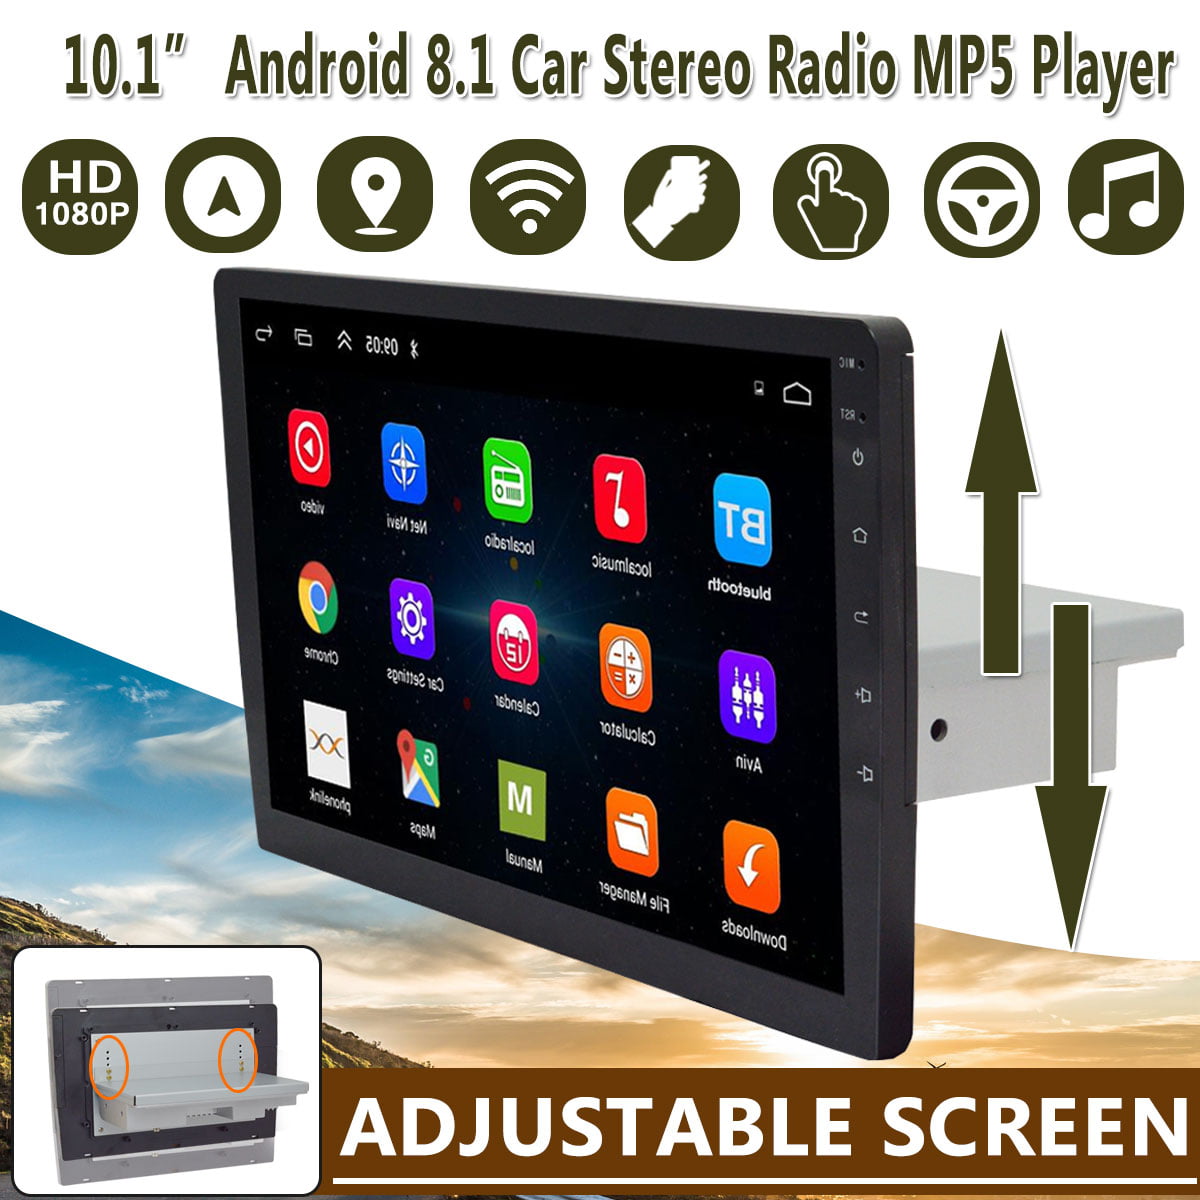 10.1" 1 Din Android 8.1 Car Quad-core Stereo Radio GPS MP5 Player Height Adjust